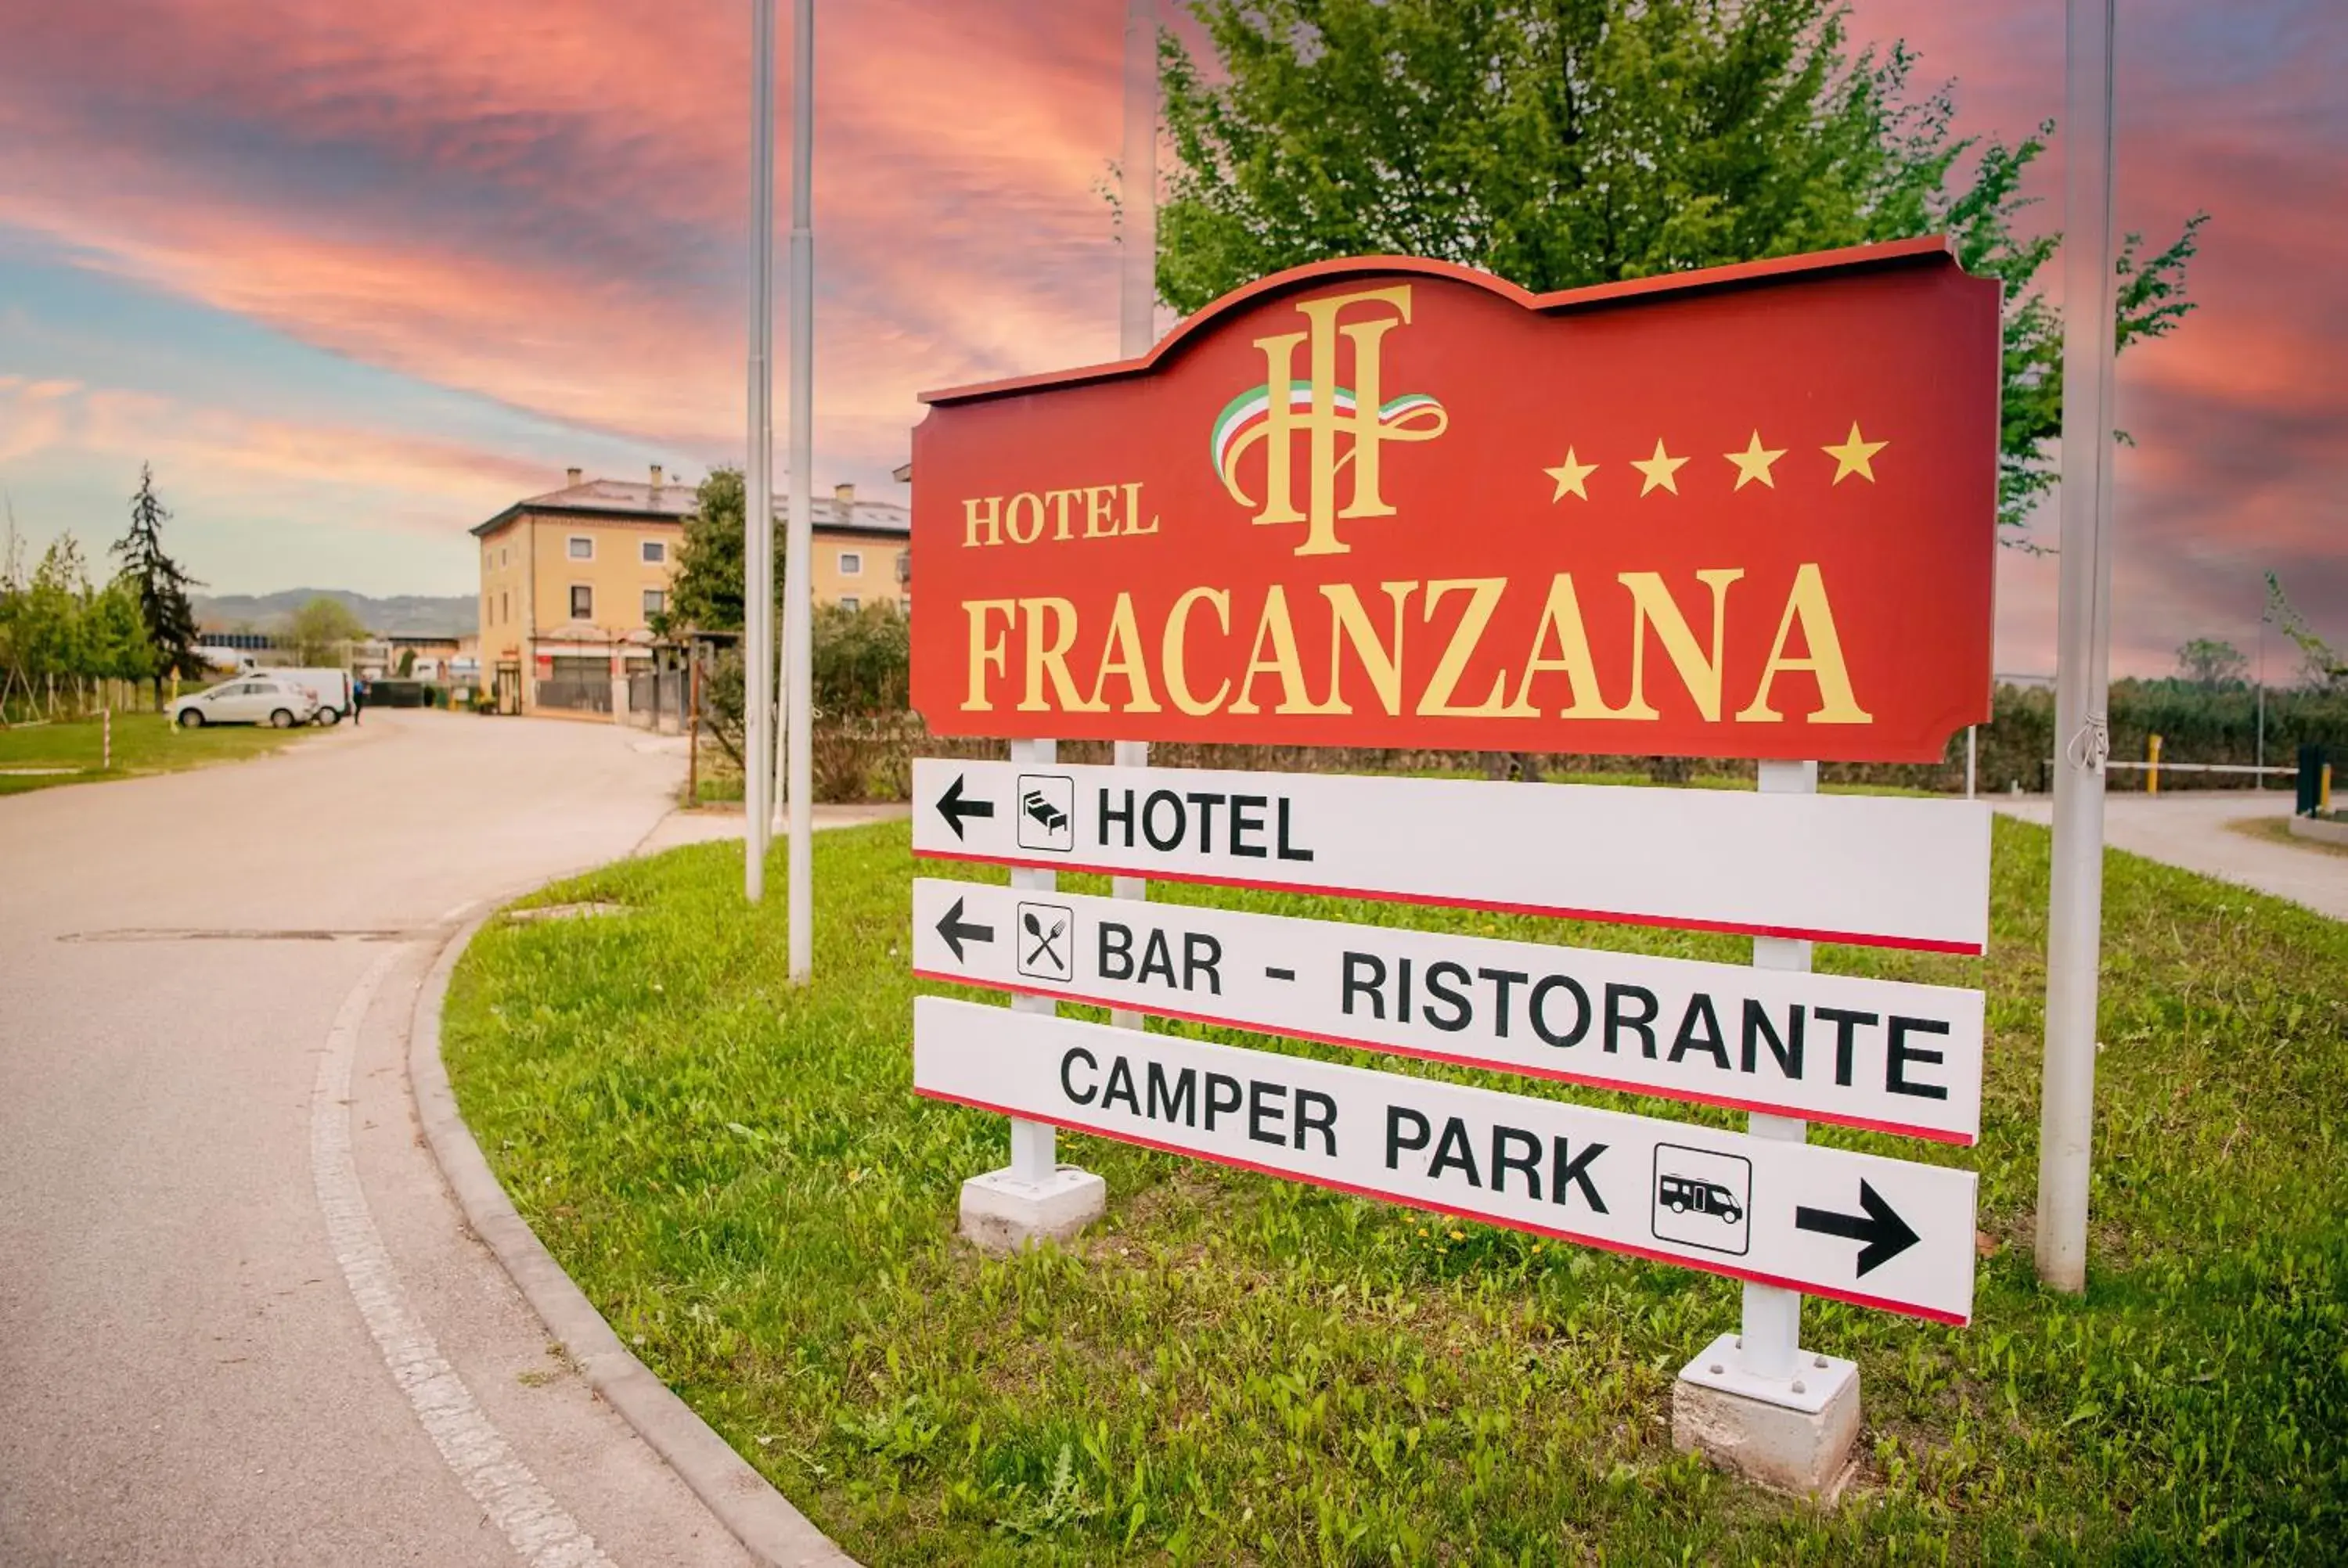 Property logo or sign in Fracanzana Hotel